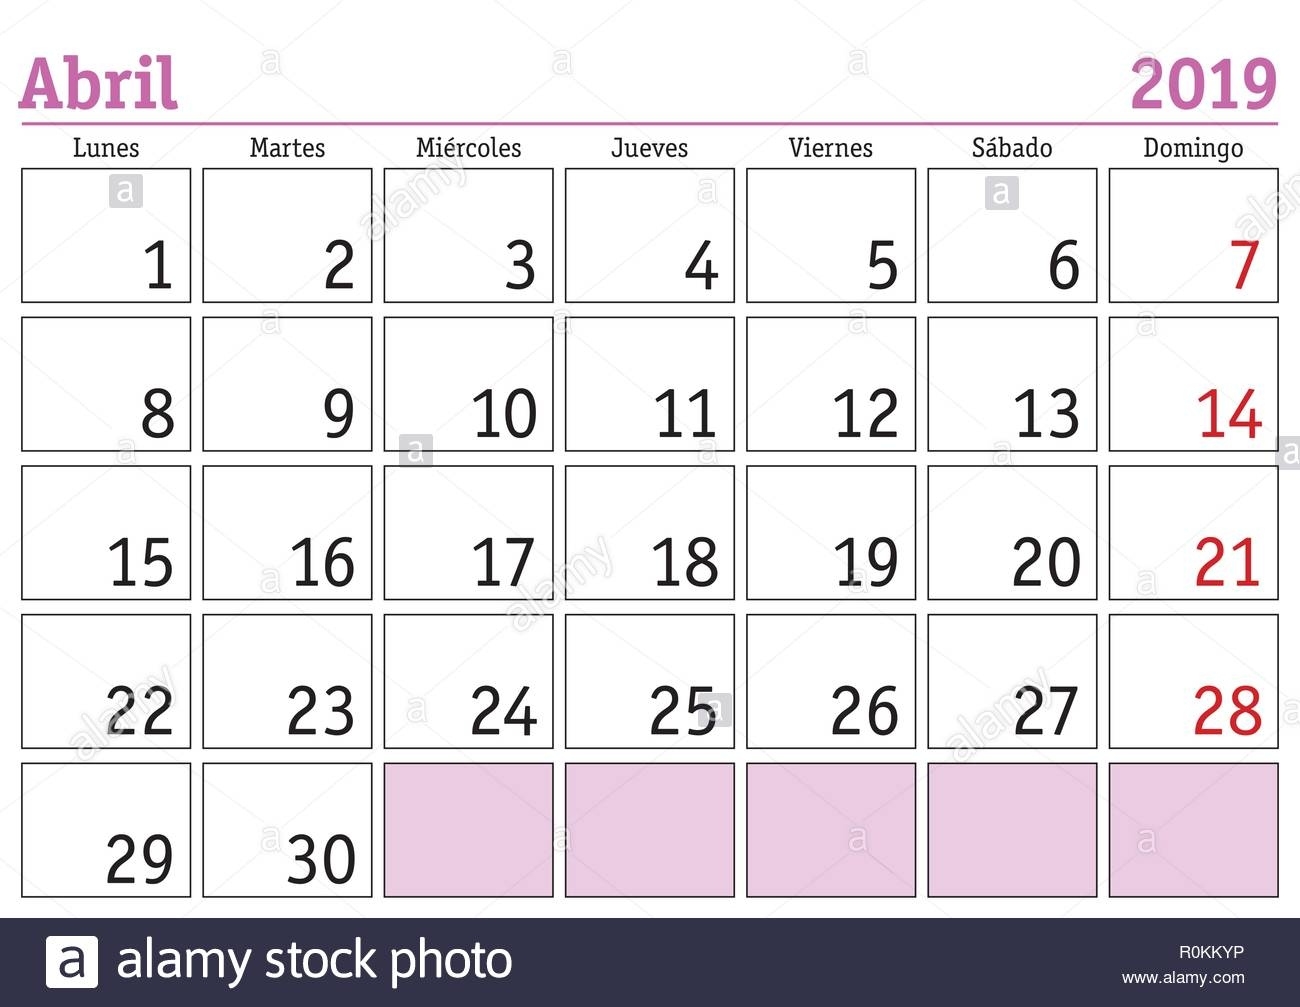 April Month In A Year 2019 Wall Calendar In Spanish. Abril 2019 Calendar Month In Spanish